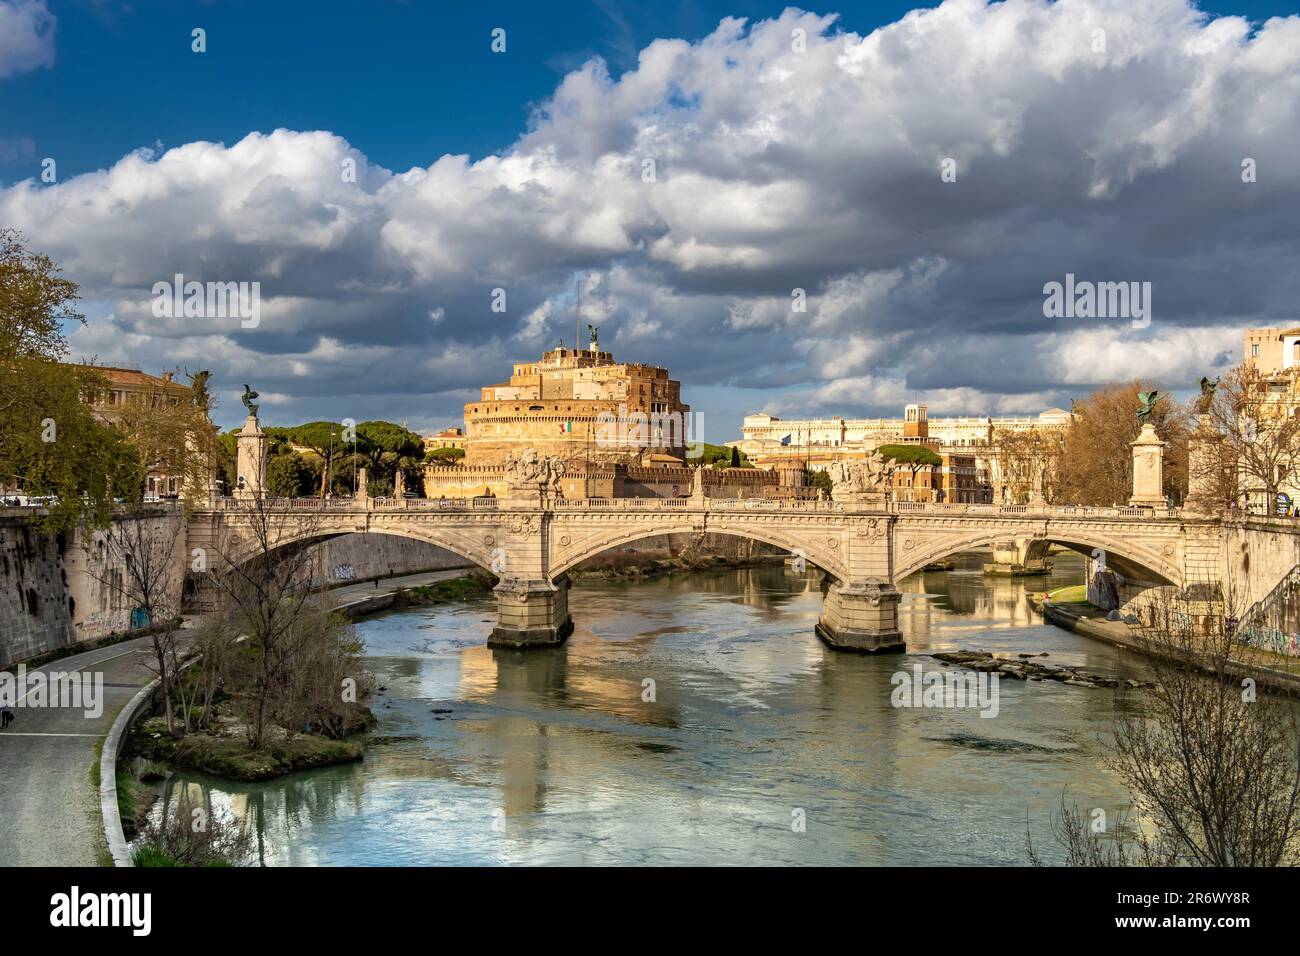 Ponte Vittorio Emanuele II bridge spanning the The River Tiber with Castel Sant'Angelo in the background, Rome, Italy Stock Photo